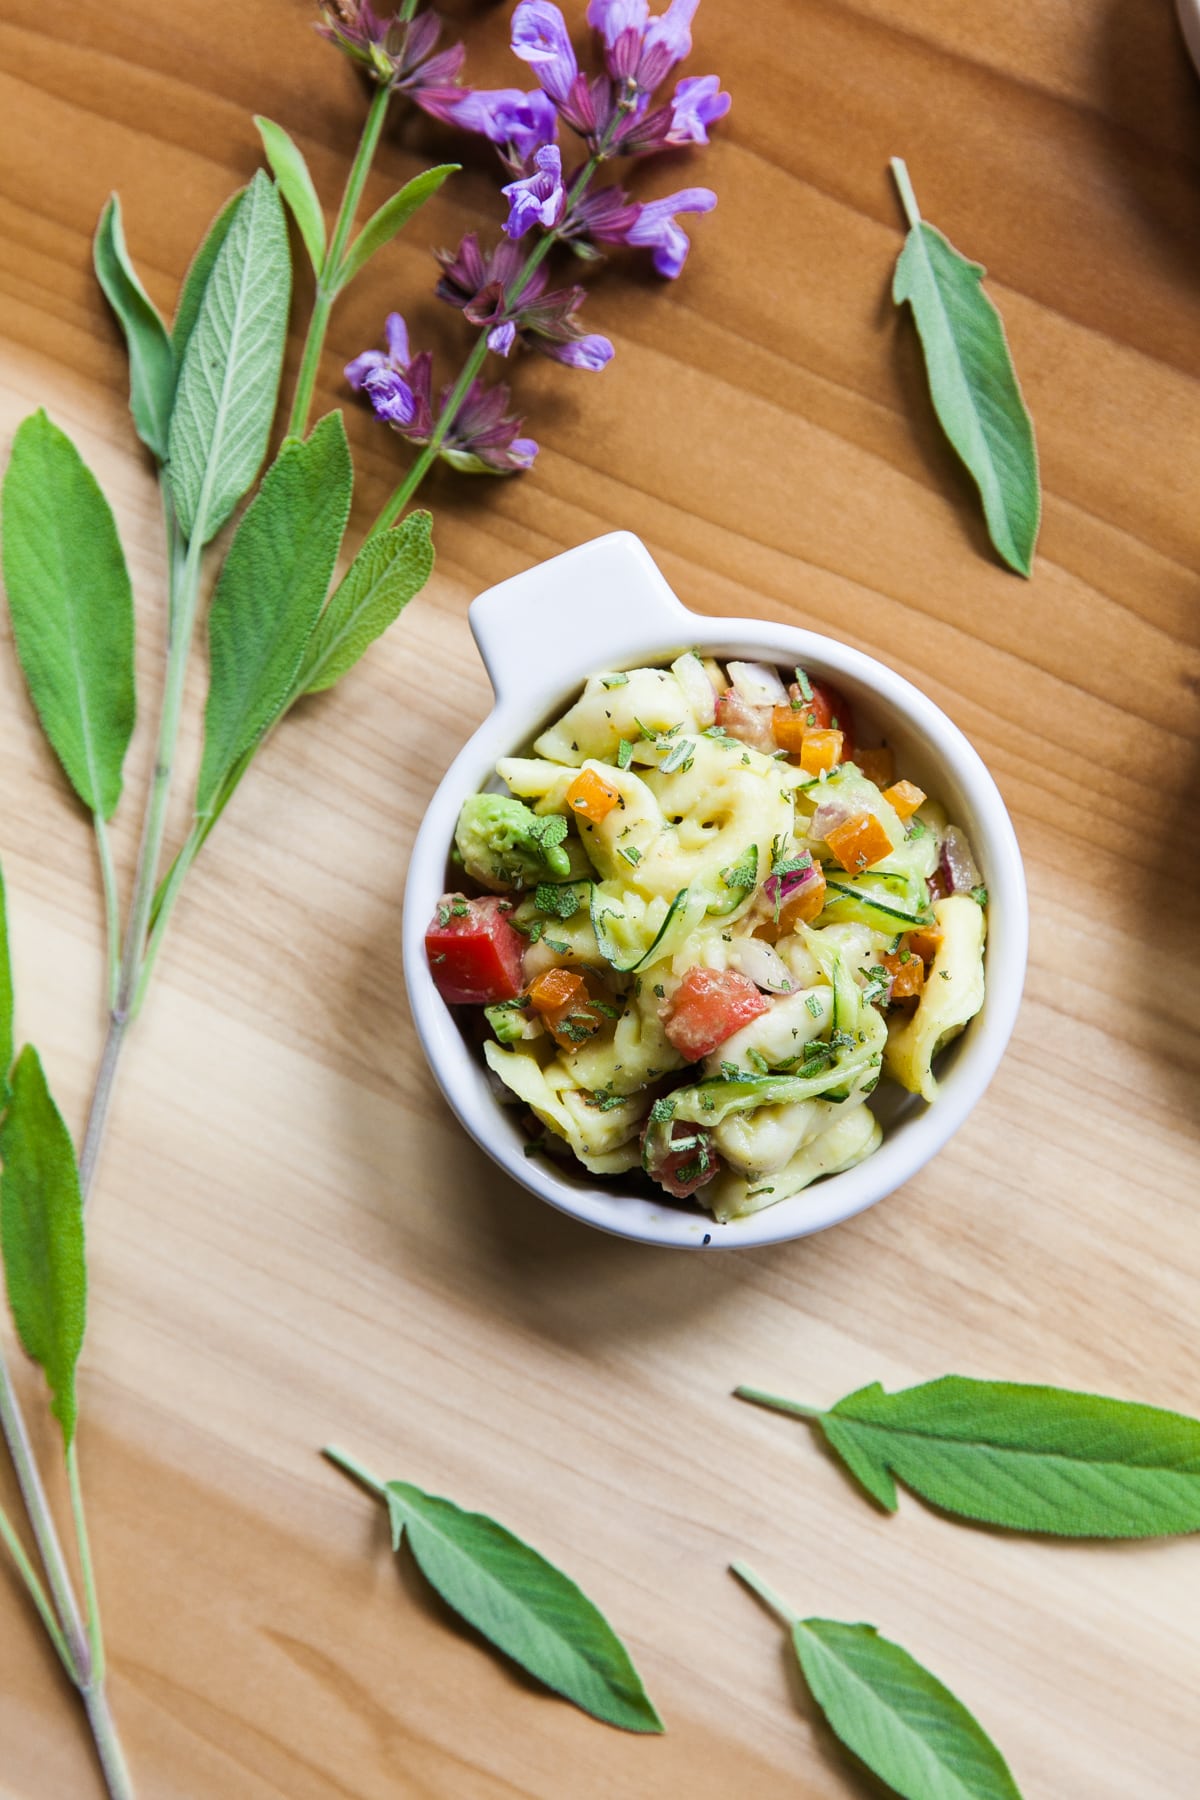 Avocado Tortellini Salad with Fresh Vegetables + Garden Sage | Pasta Salad Recipe | Good Potluck Dishes | Picnic Food | Easy Side Dishes for Potluck | Jessica Brigham | Magazine Ready for Life